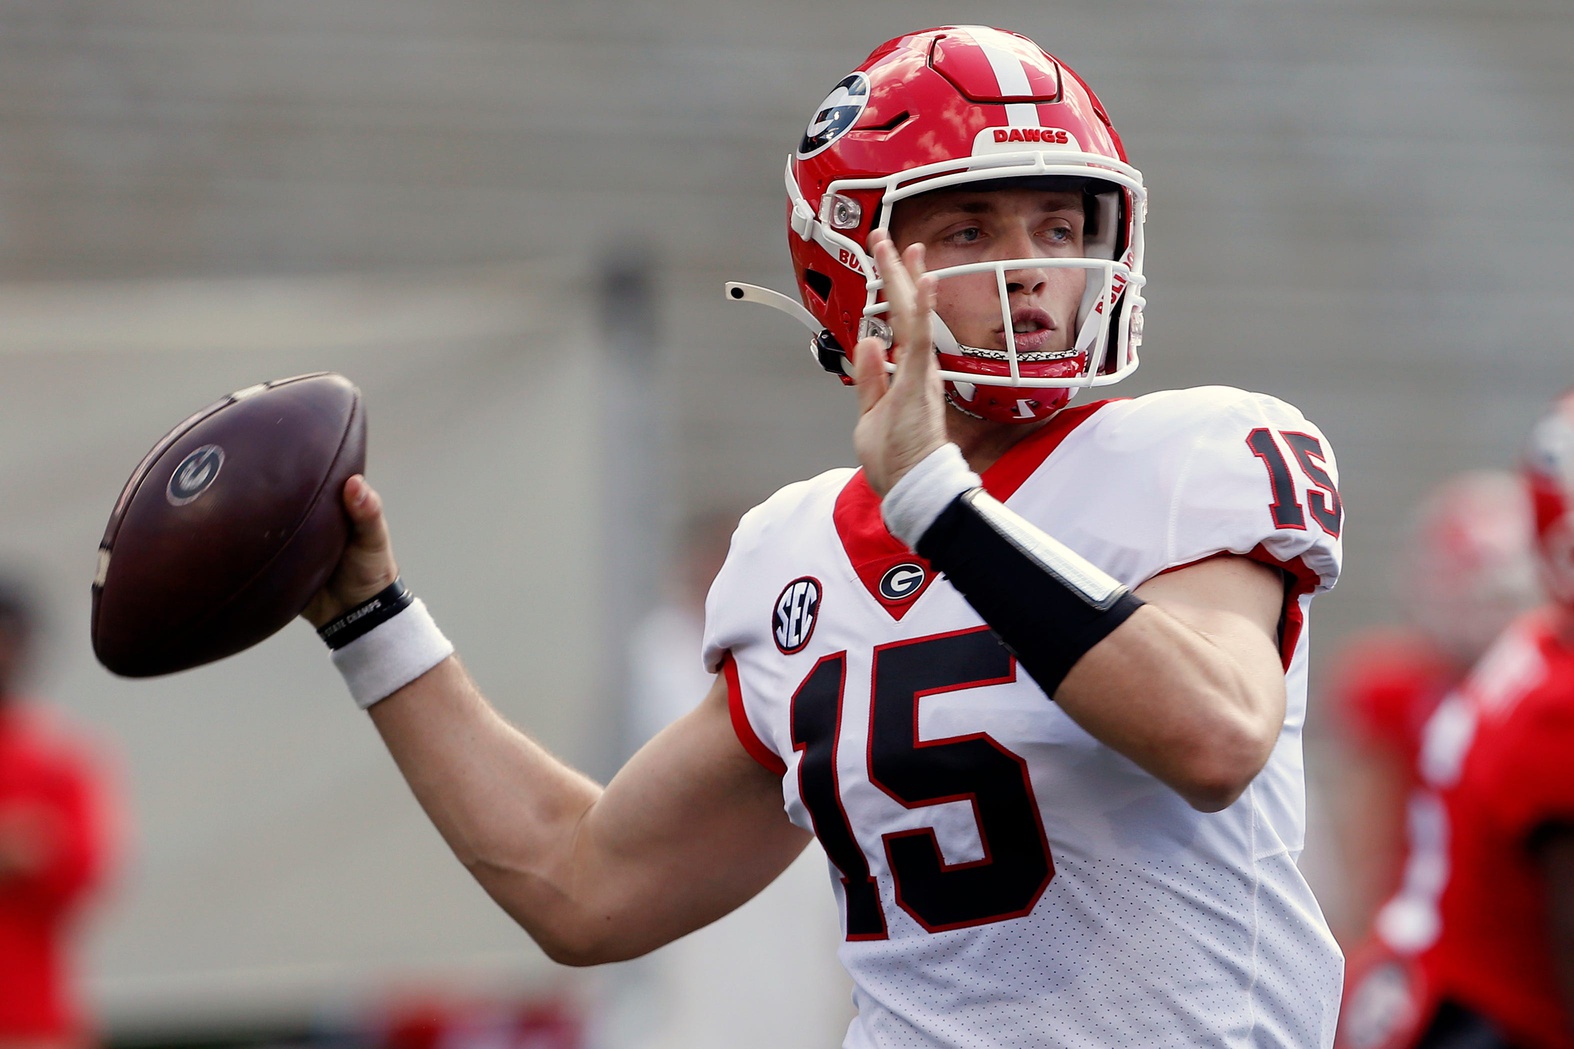 Carson Beck was named the starter for the Georgia Bulldogs. We break down the three keys for Beck's success in 2023.